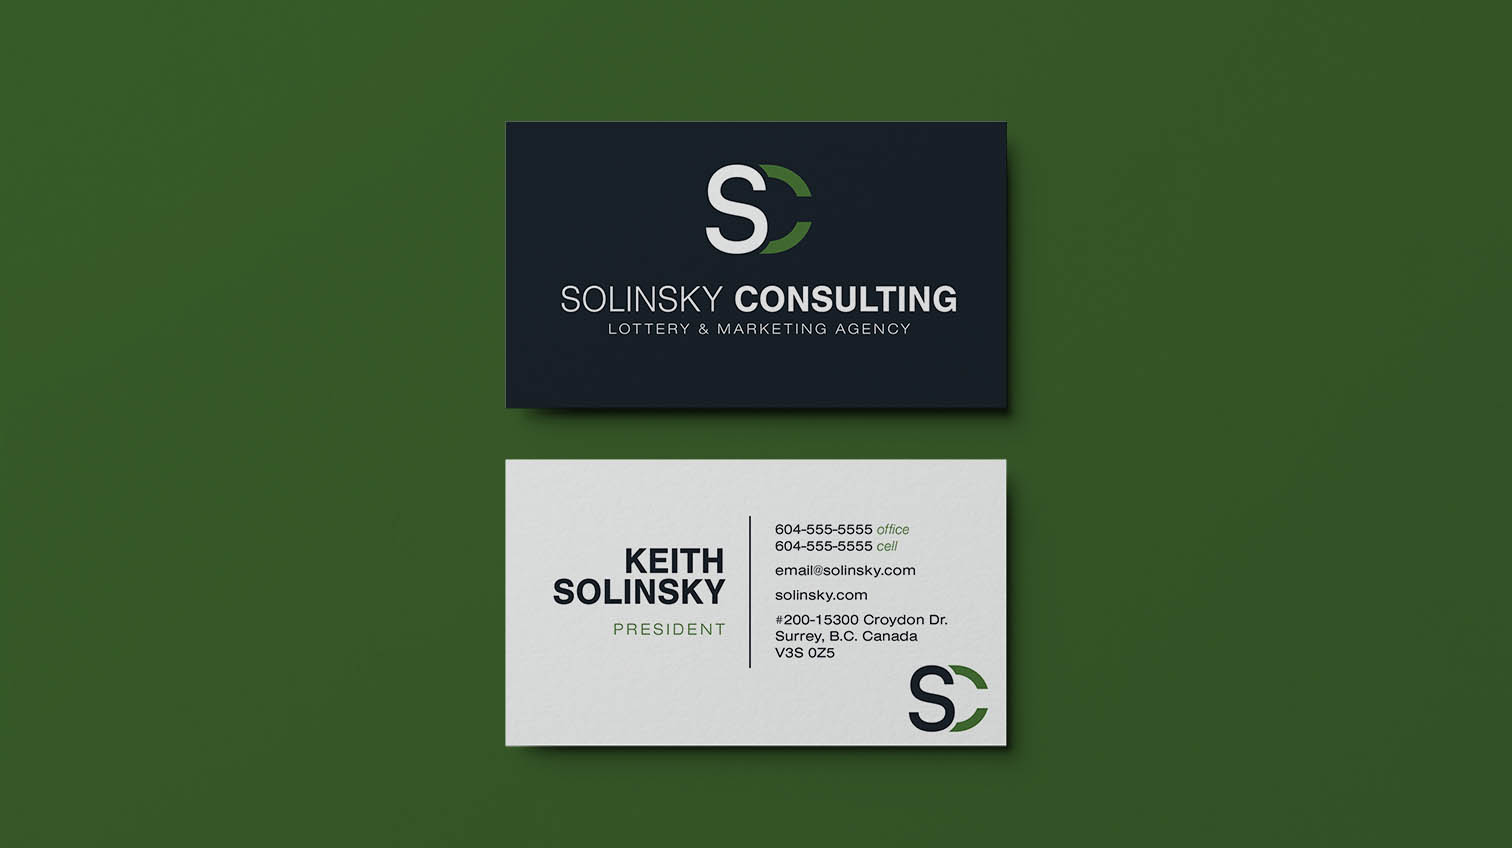 Solinsky Consulting Business Card Mockup - White Canvas Design